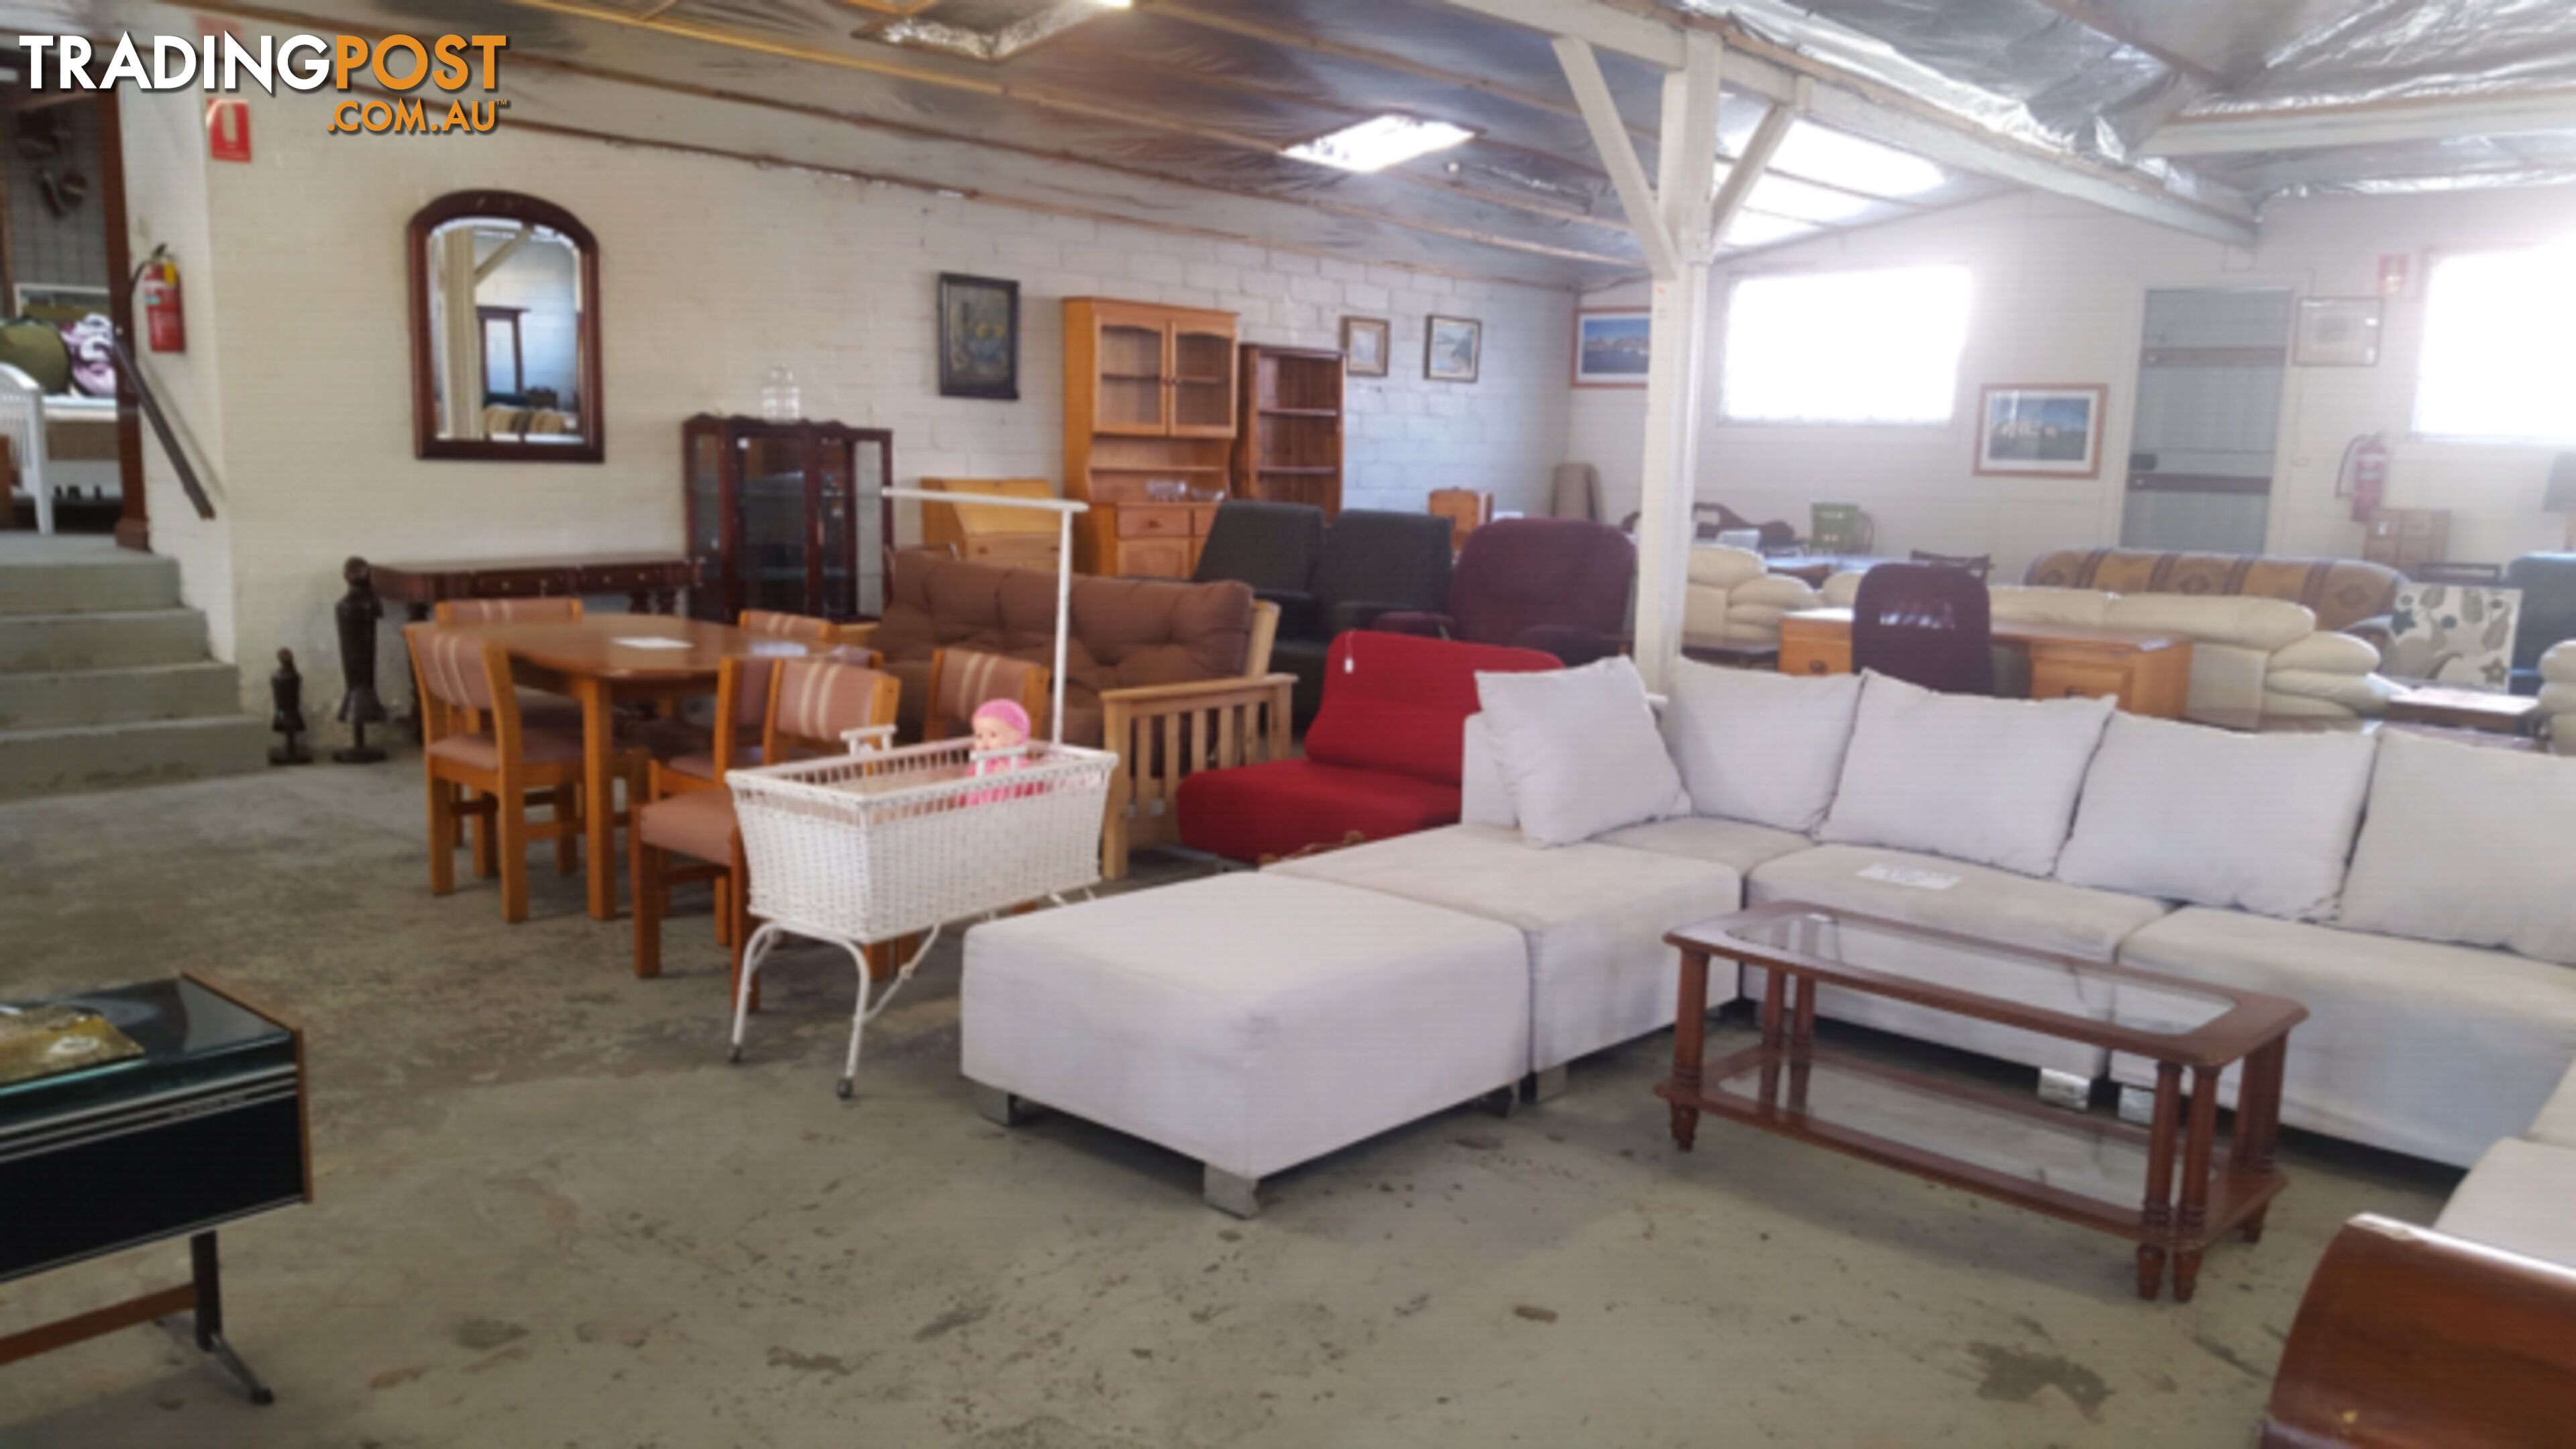 Furniture For Sale Sun 10am to 4pm